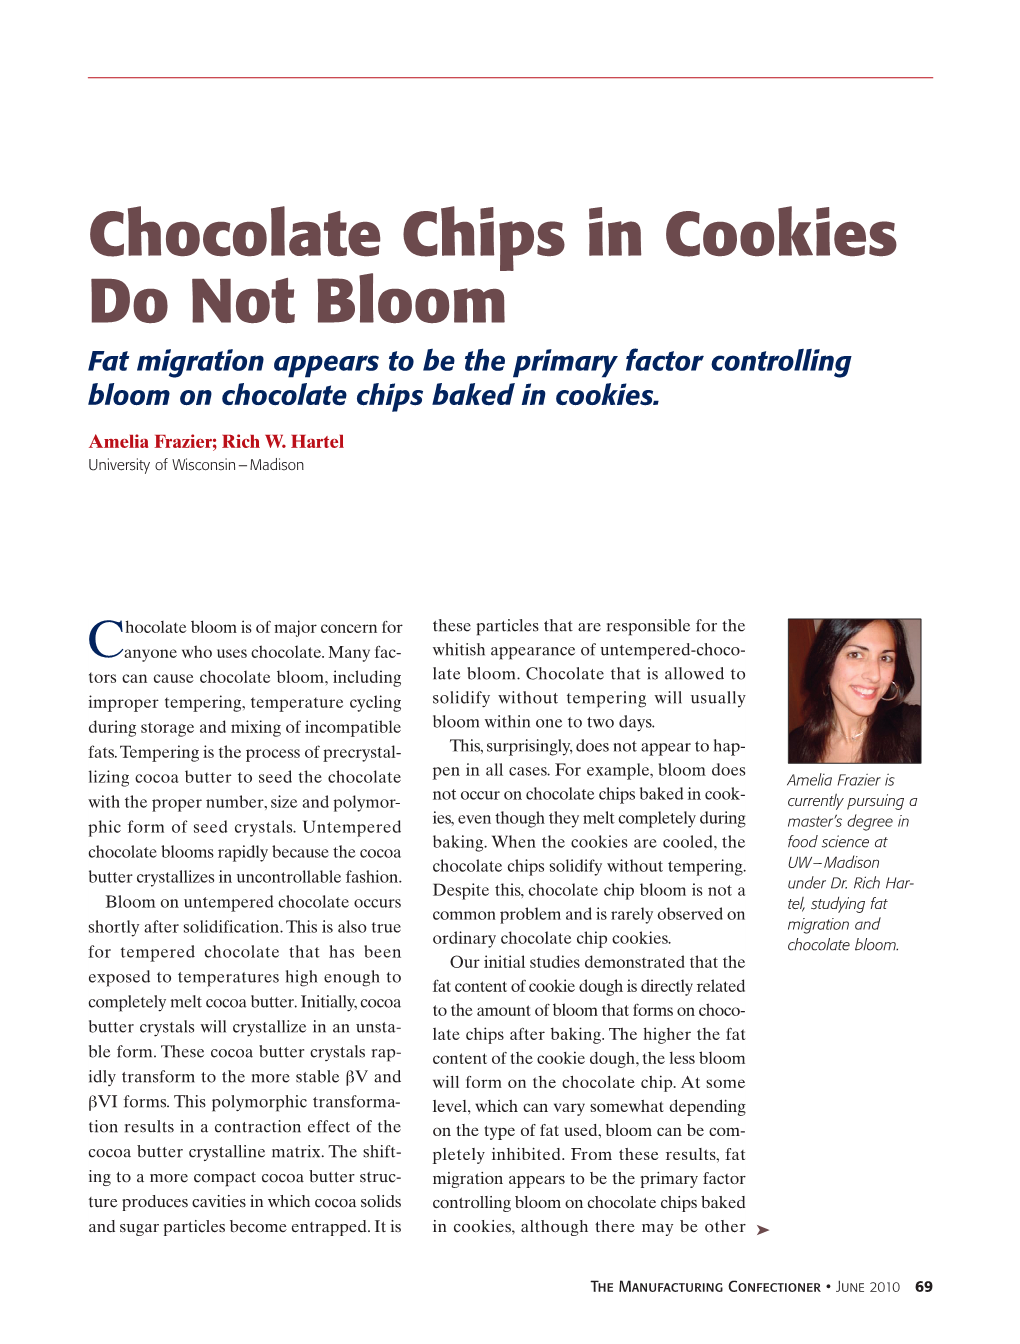 Chocolate Chips in Cookies Do Not Bloom Fat Migration Appears to Be the Primary Factor Controlling Bloom on Chocolate Chips Baked in Cookies